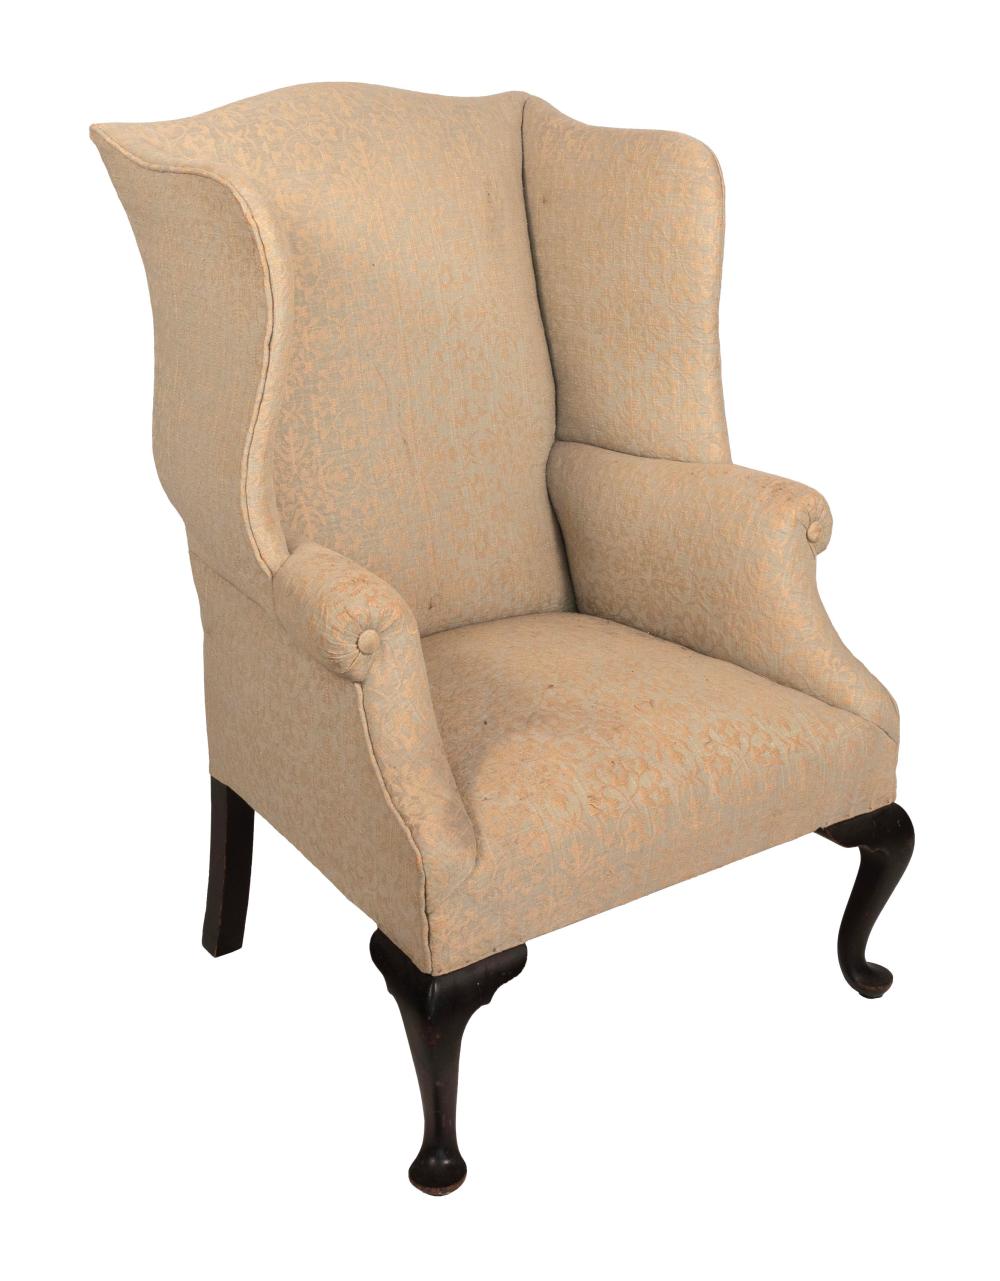 QUEEN ANNE-STYLE WING CHAIR EARLY